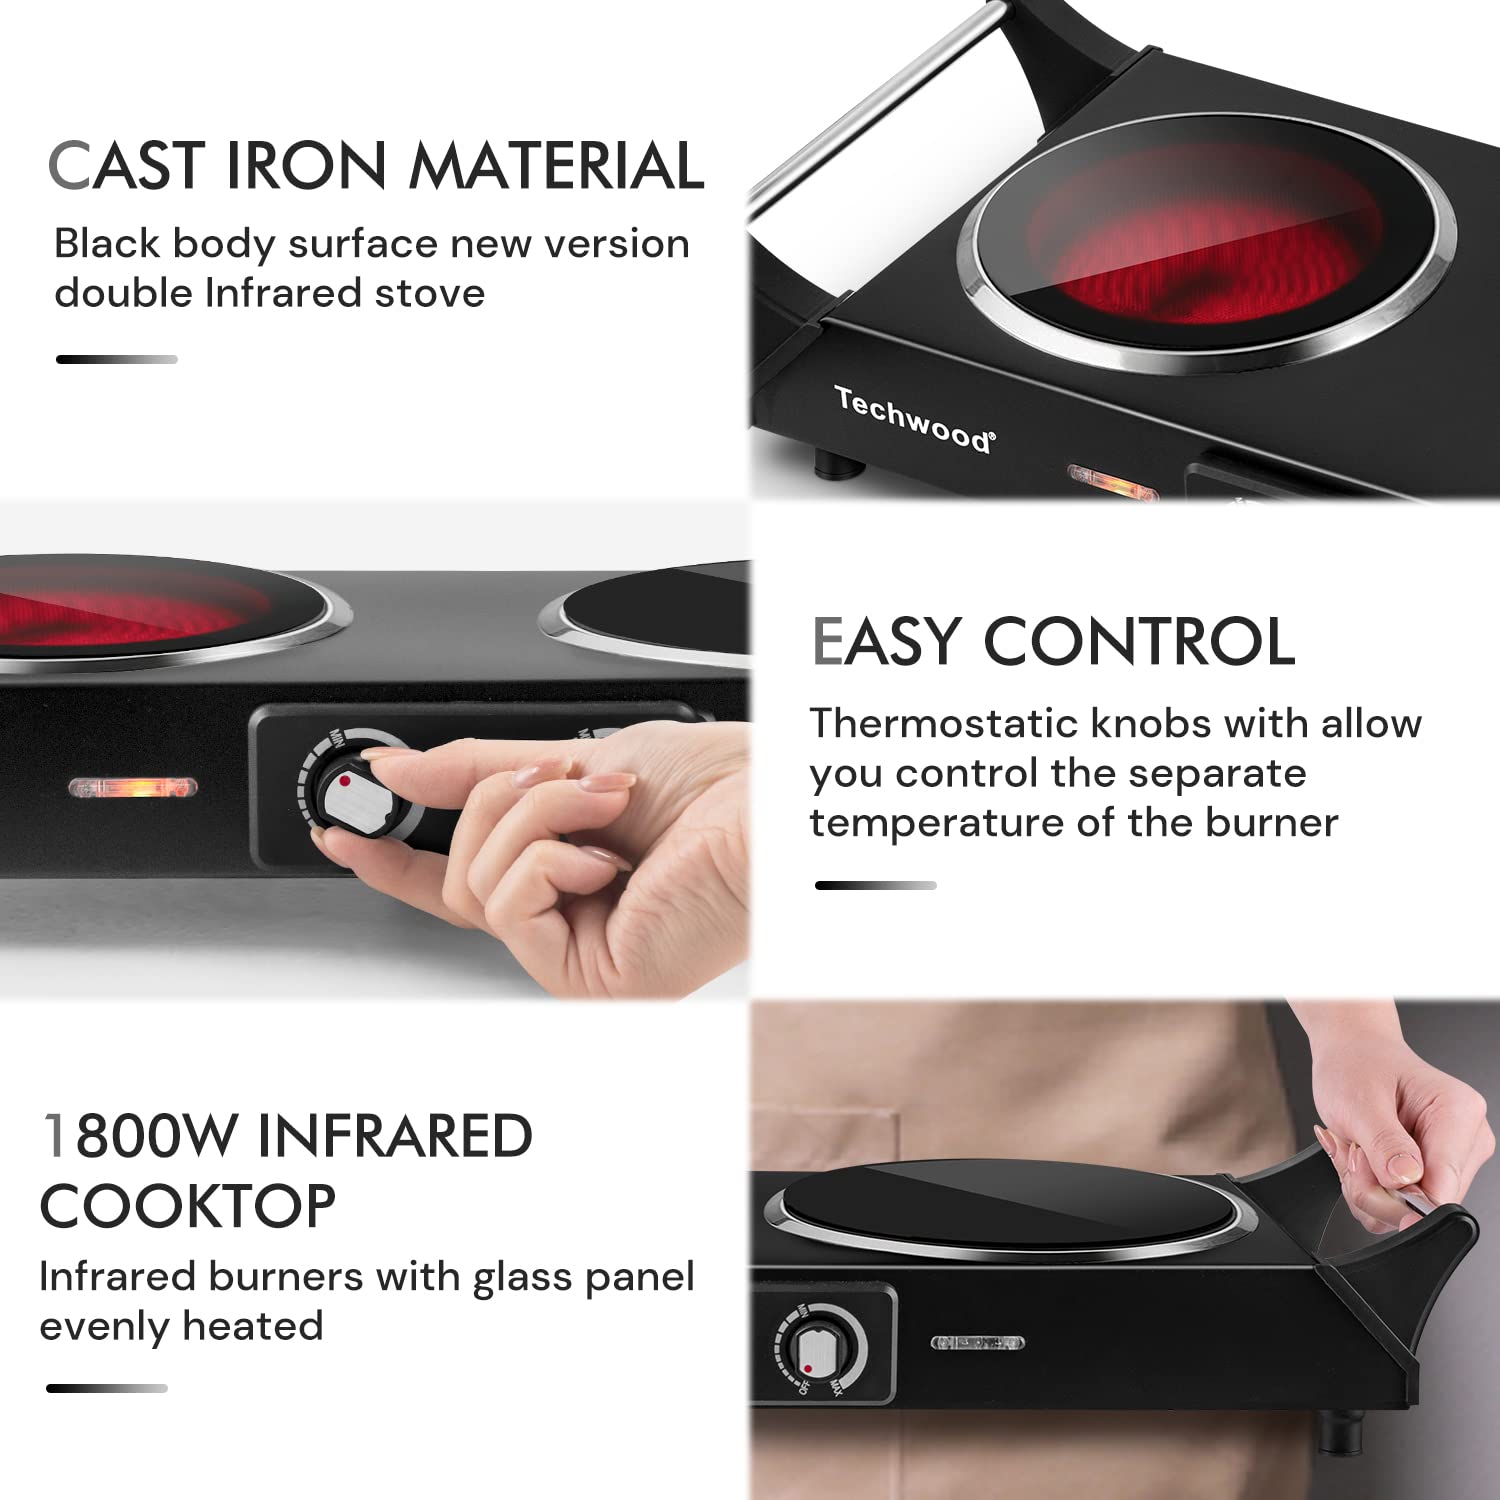 Hot Plate, Techwood 1800W Double Infrared Ceramic Electric Stove for Cooking, Dual Control Cooktop Burners, Portable Anti-scald Handles Suitable for RV/Home/Camp, Compatible for All Cookwares